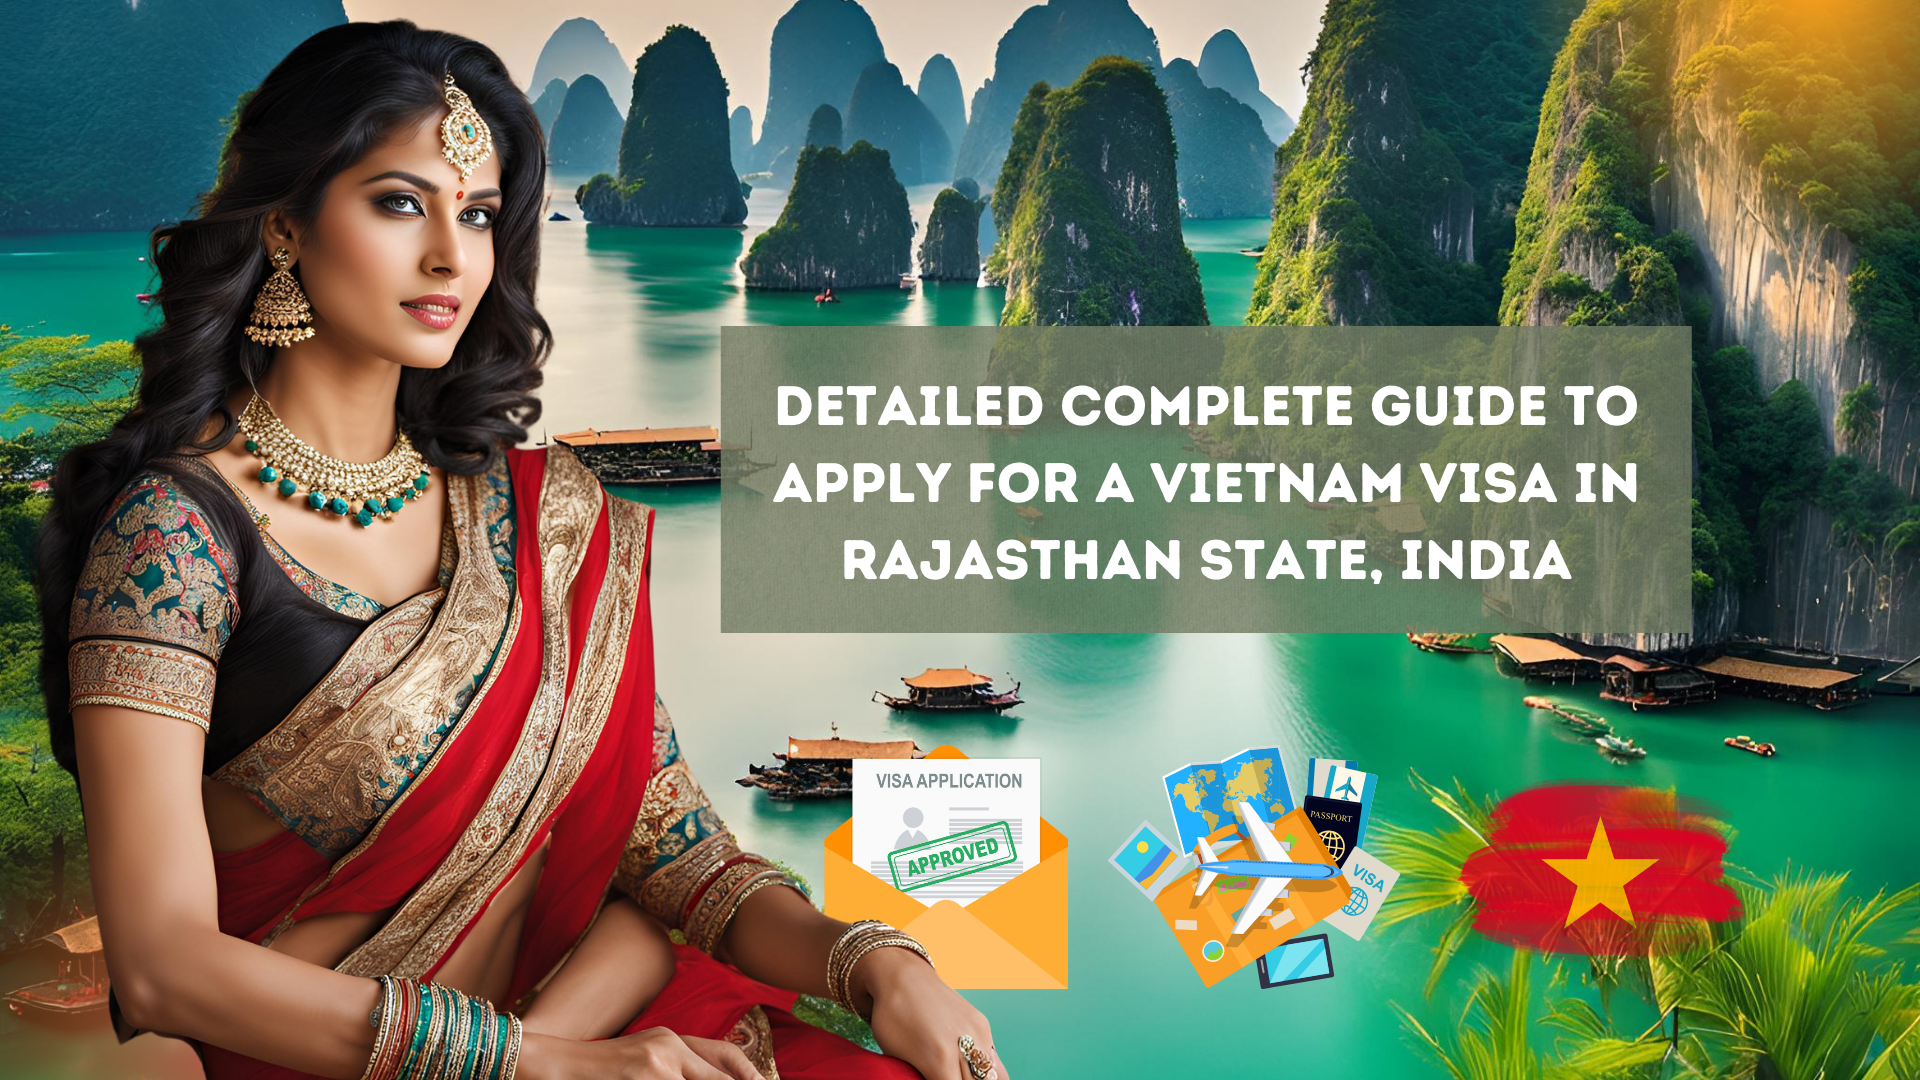 Detailed Complete Guide to Apply for a Vietnam Visa in Rajasthan State, India